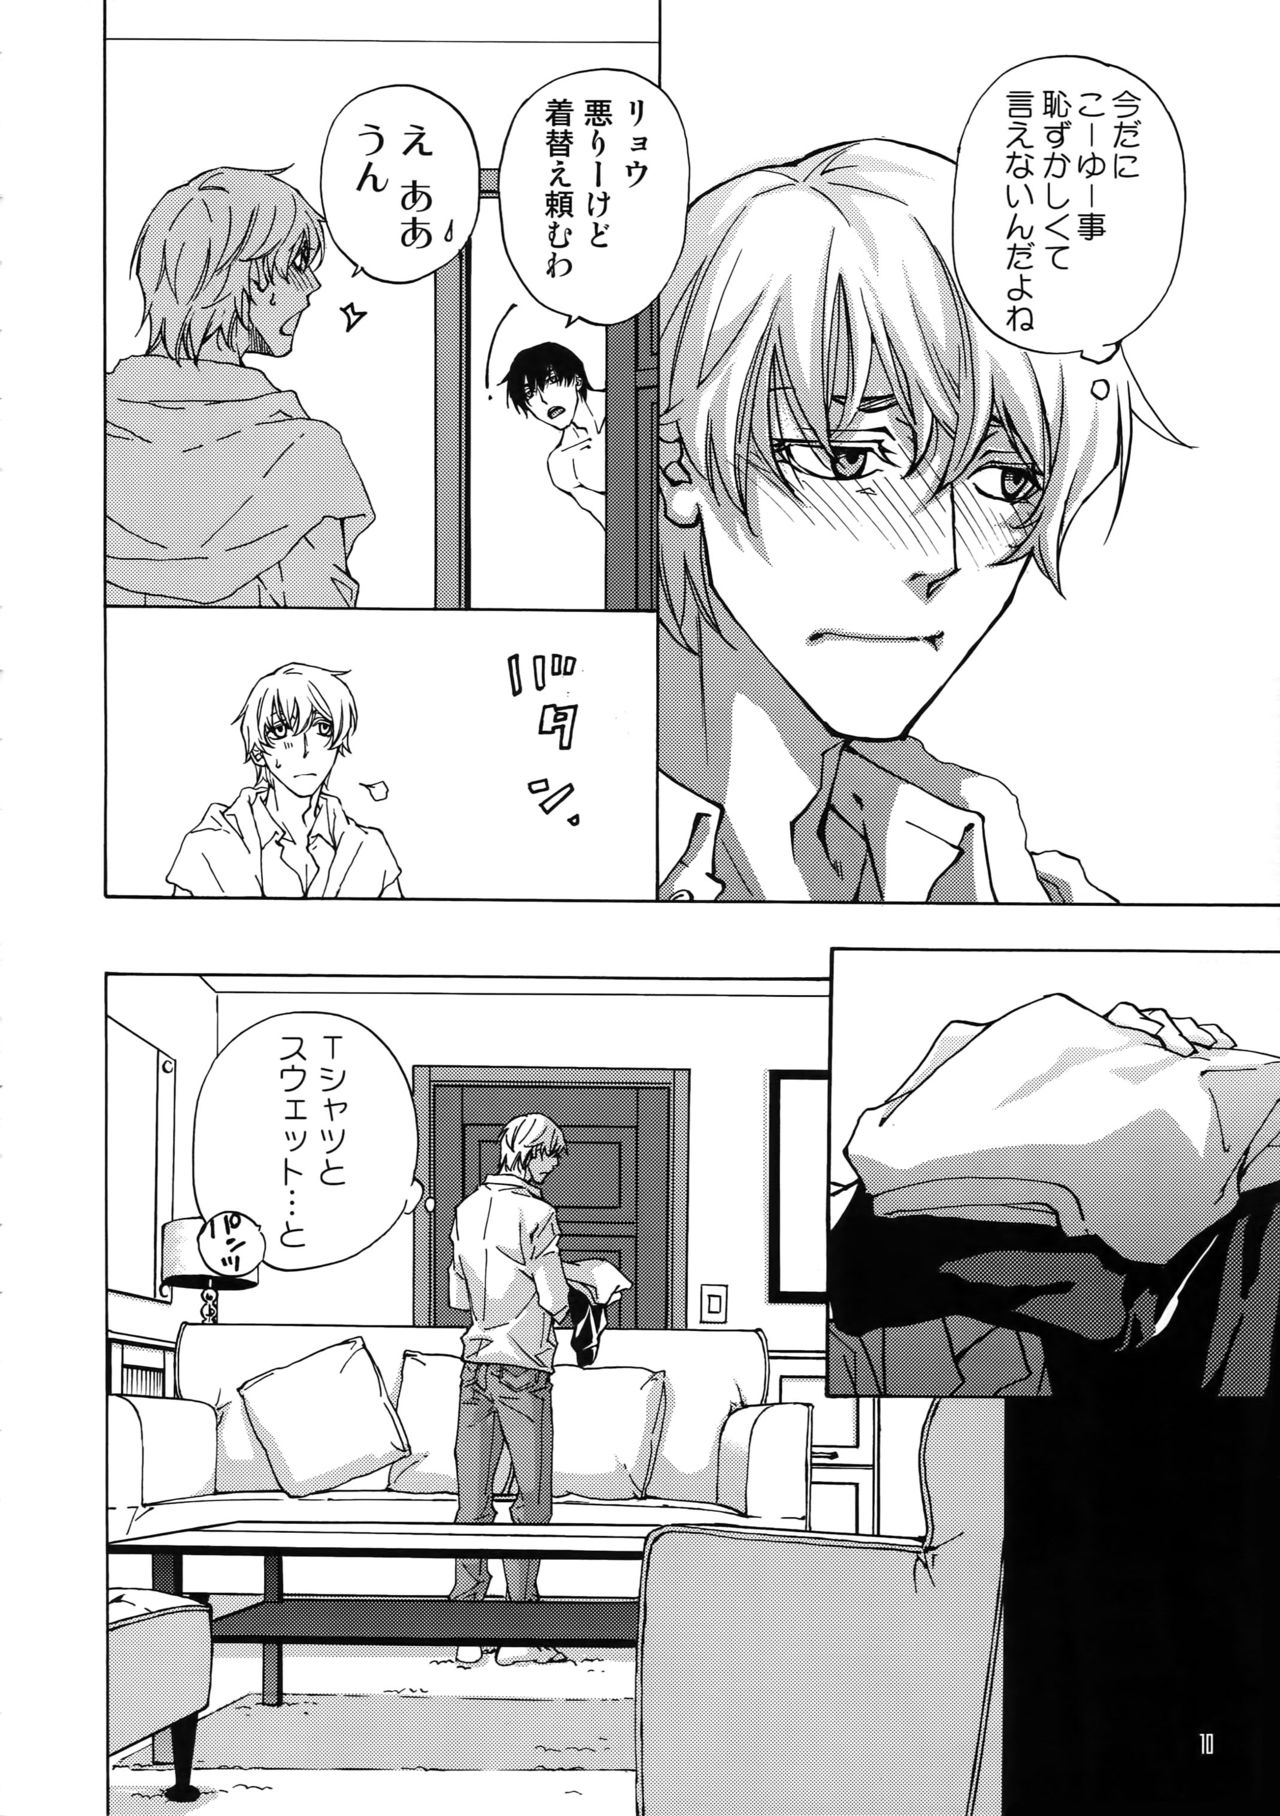 [East End Club (Matoh Sanami)] BACK STAGE PASS 10 page 7 full